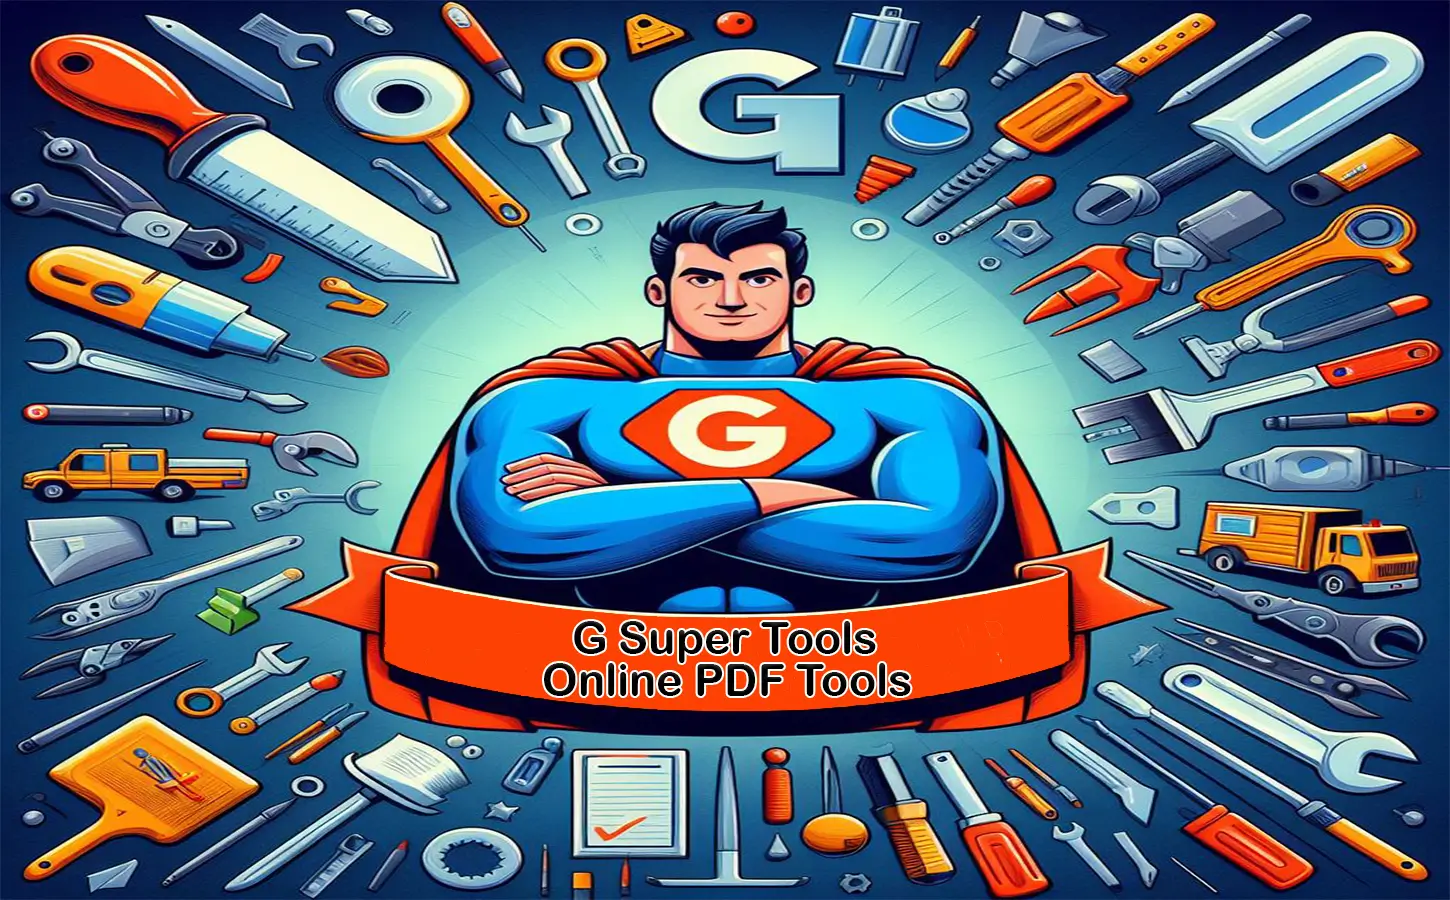 100% Free Online PDF Tools -  PDF Management with G Super Tools